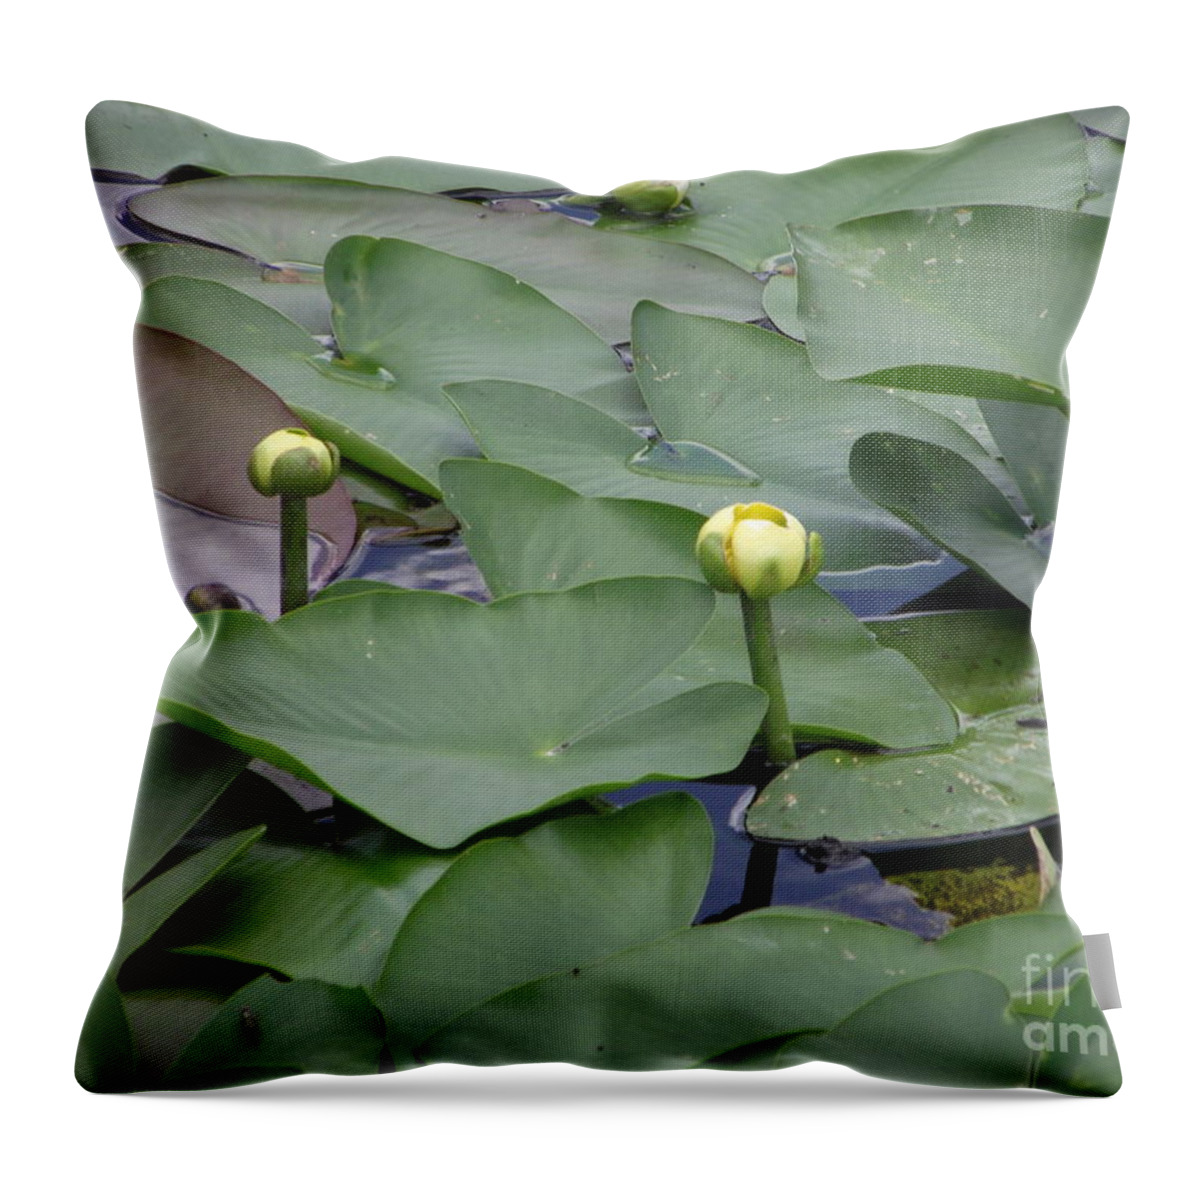 Lily Pad Throw Pillow featuring the photograph Everglade Beauty by Michelle Welles